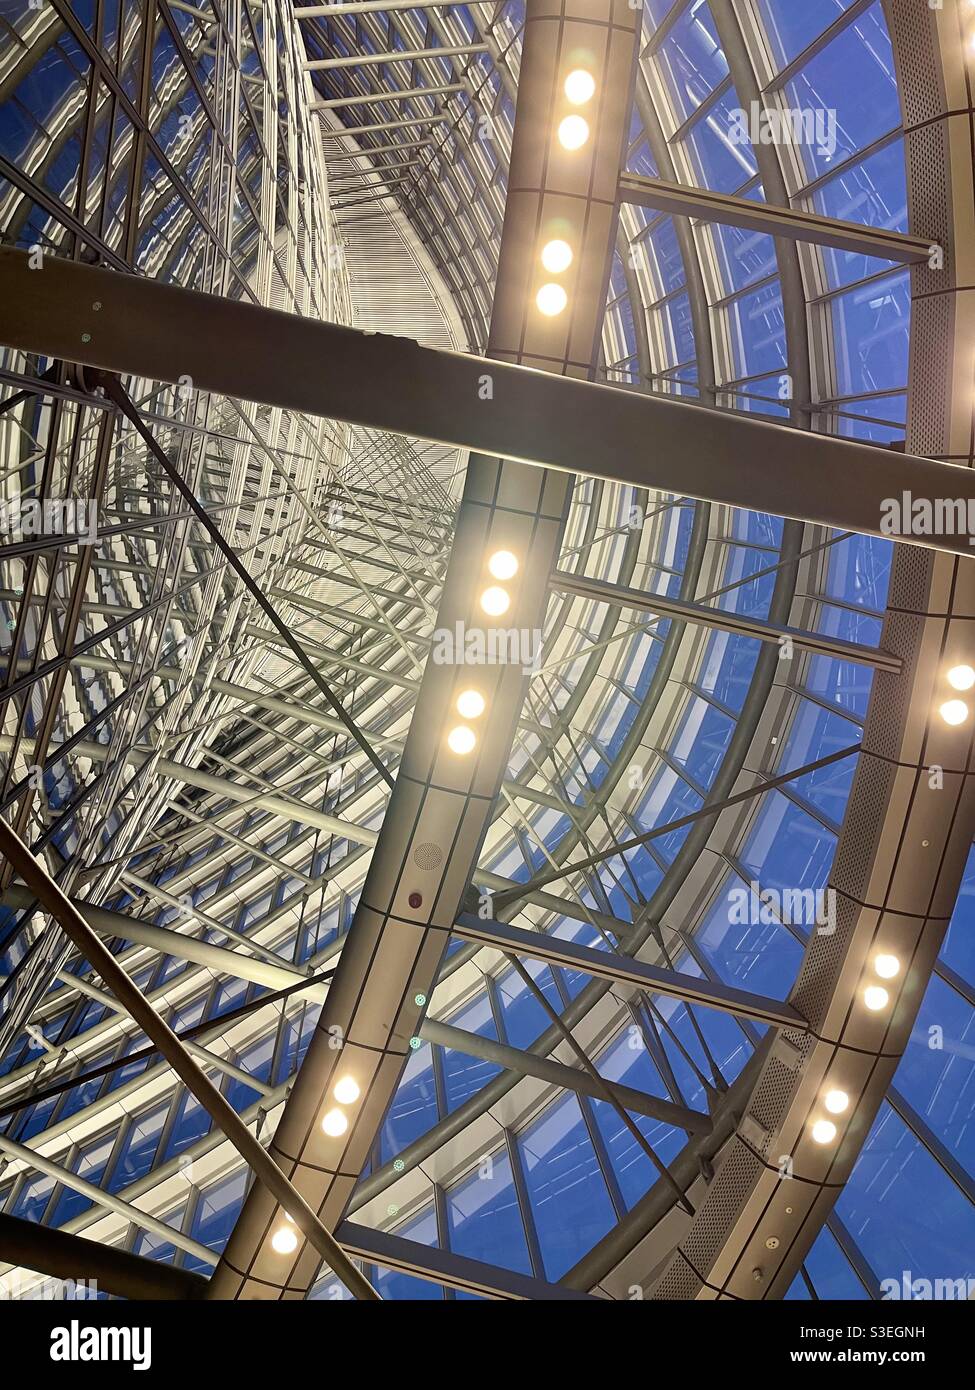 Iron and light, building structure. Stock Photo